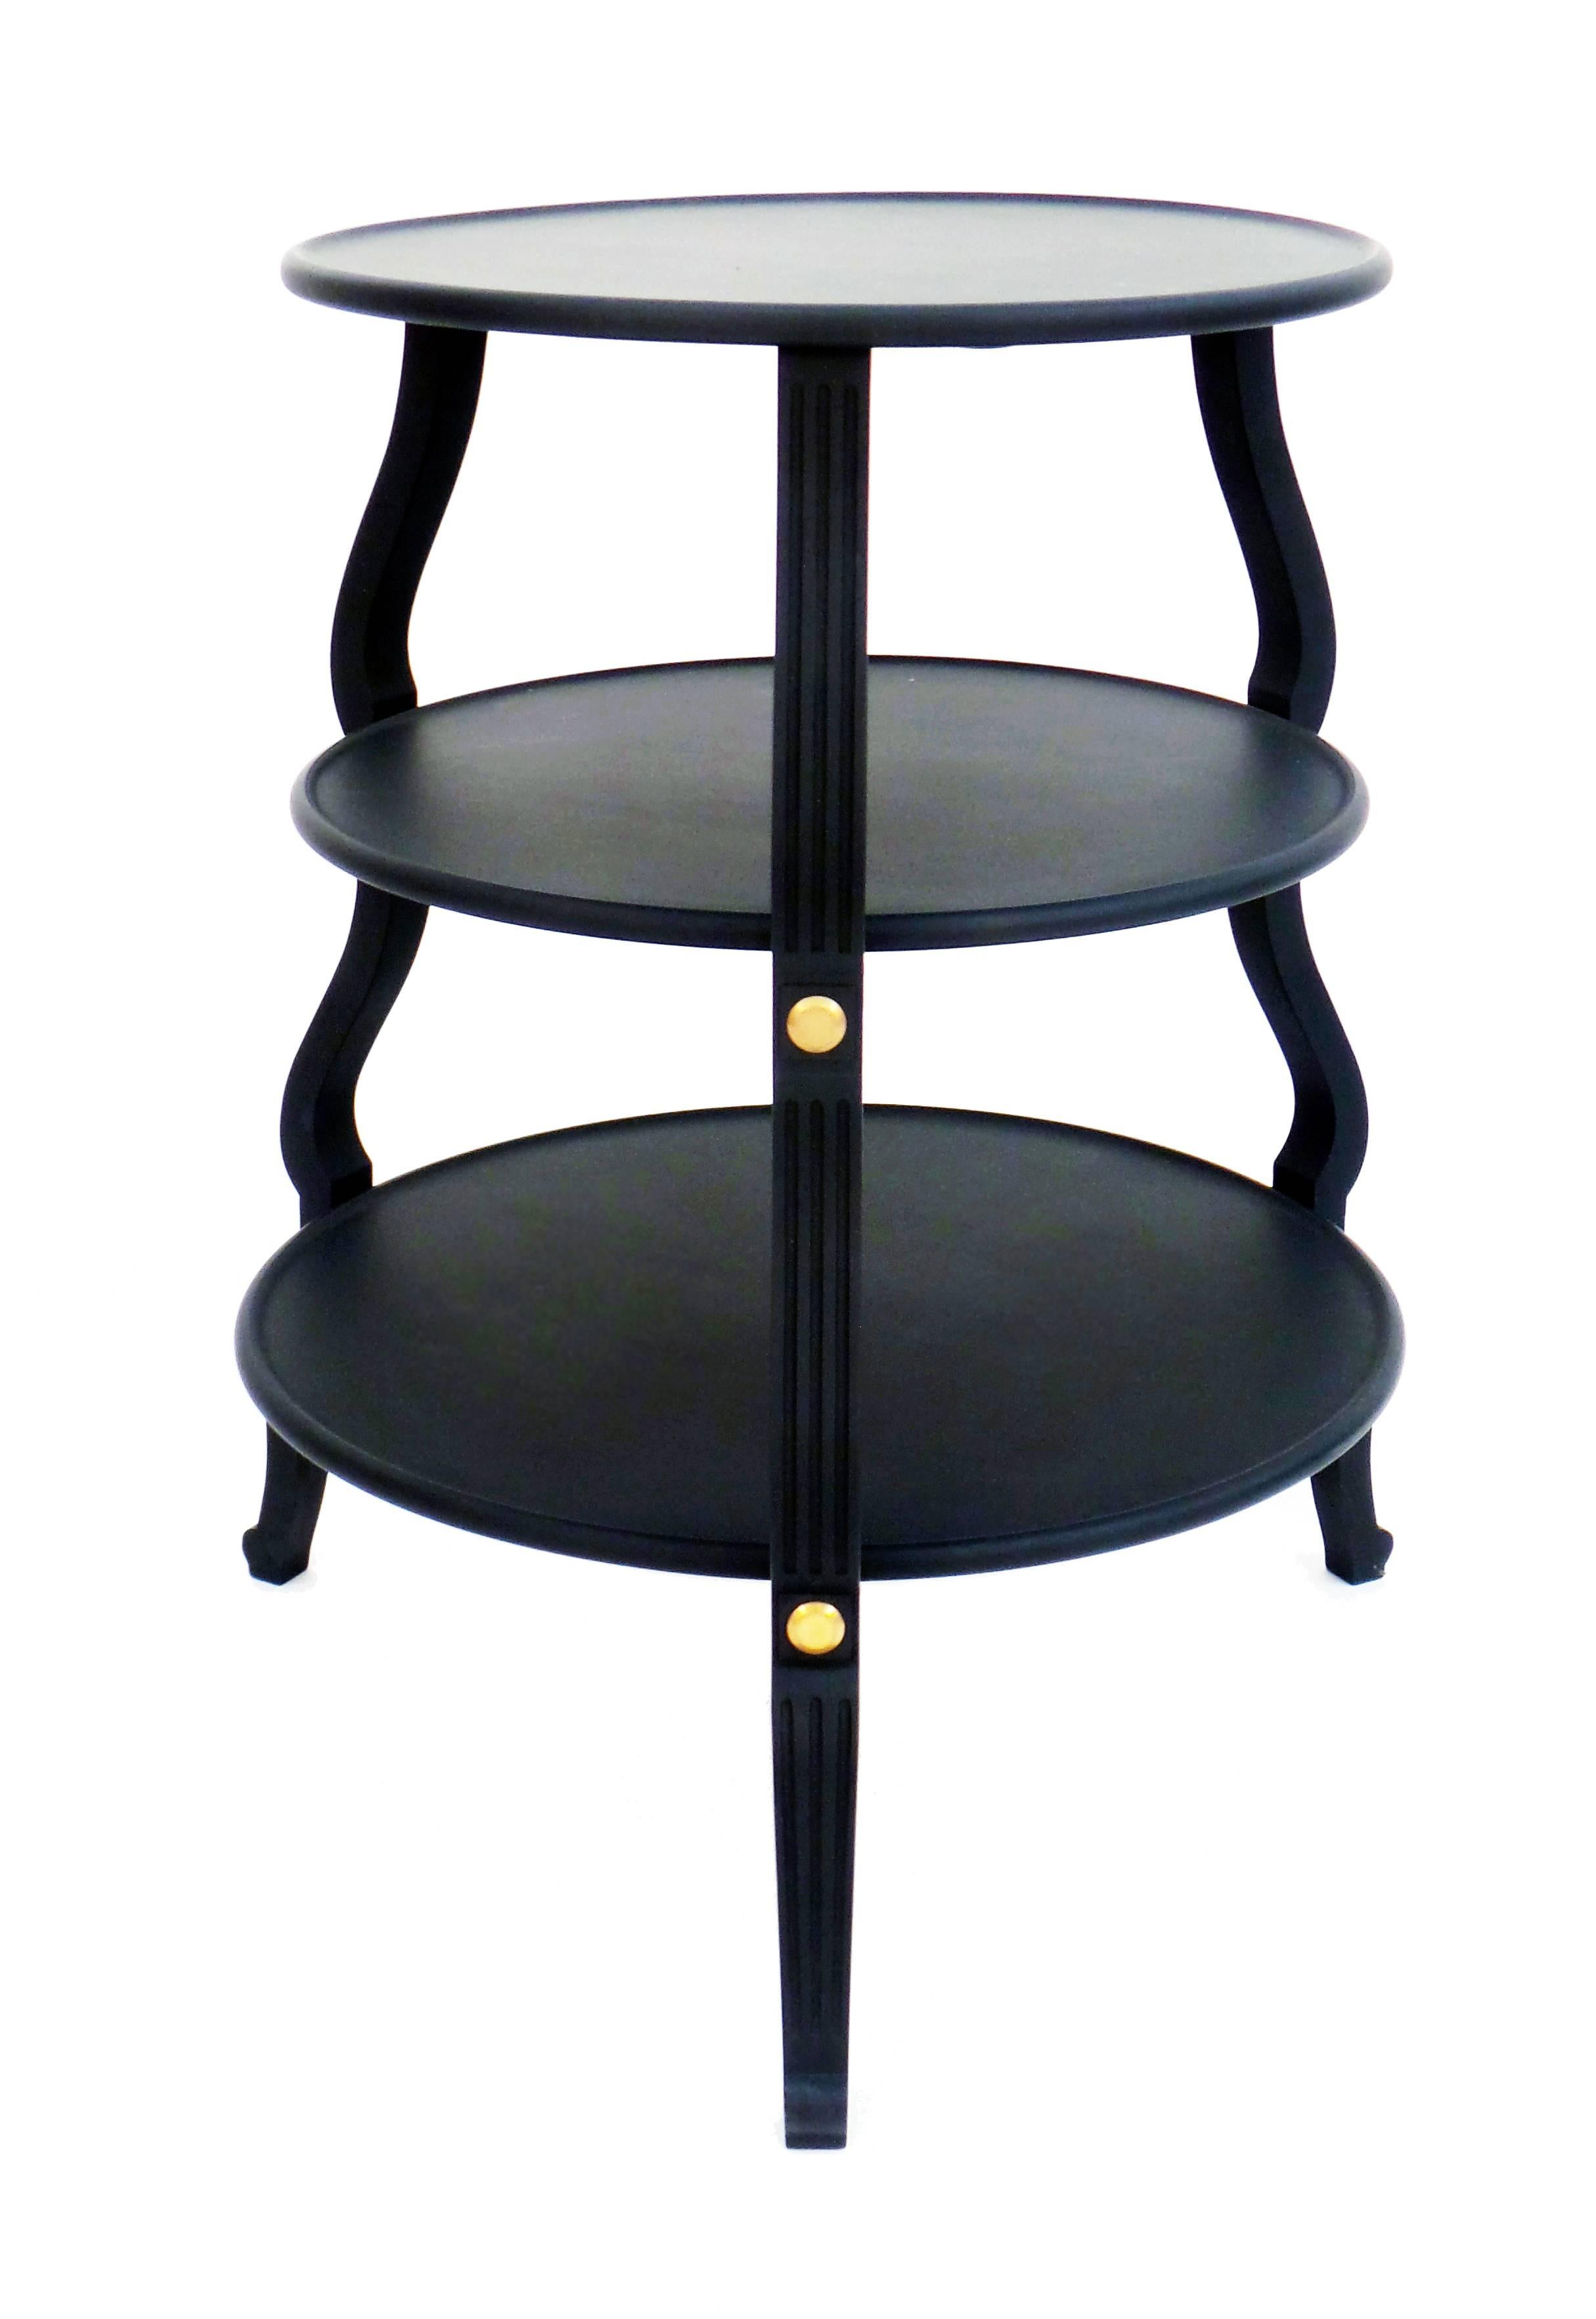 A circular side table with three floating tiers, each with tray-top surfaces, supported by 3 baluster-form fluted legs with custom brushed brass mounts. Shown in a matte-black lacquer finish. Custom dimensions, finishes, as well as coffee table